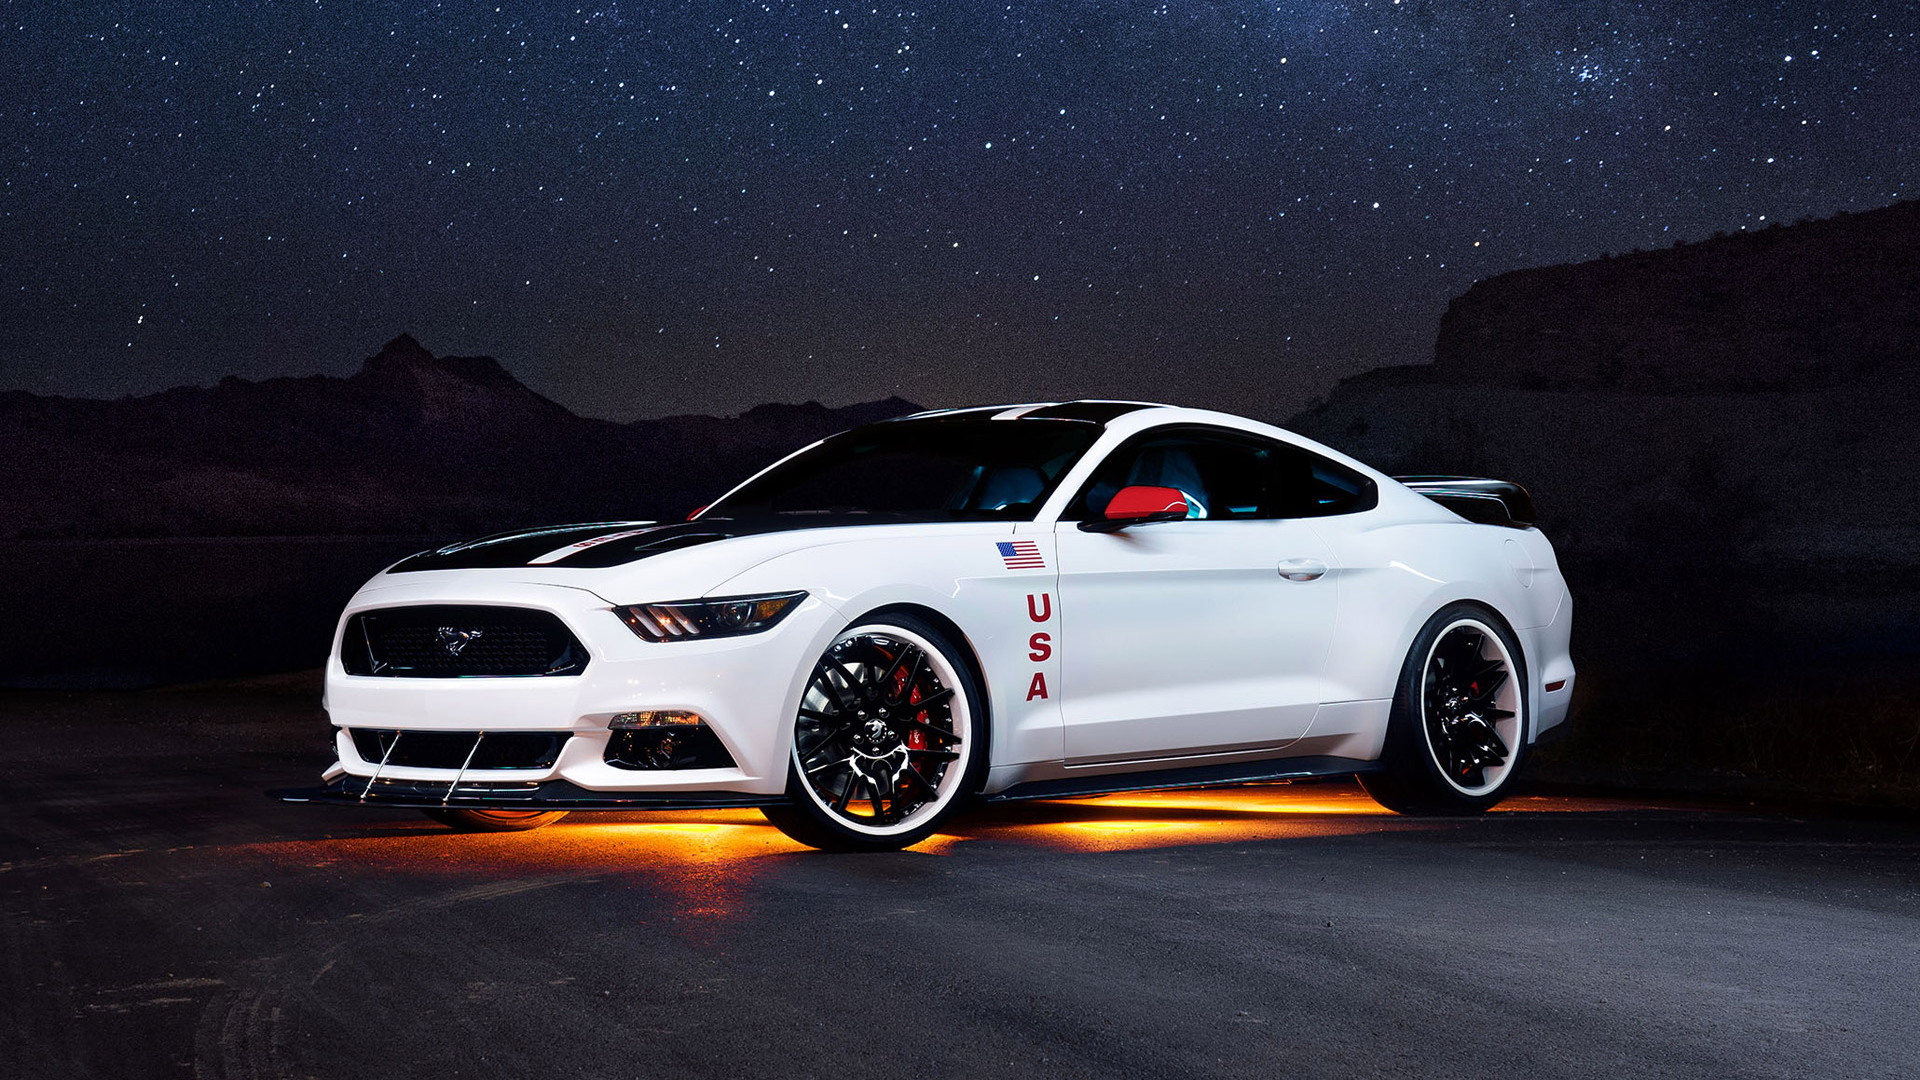 2015 Ford Mustang Apollo Edition